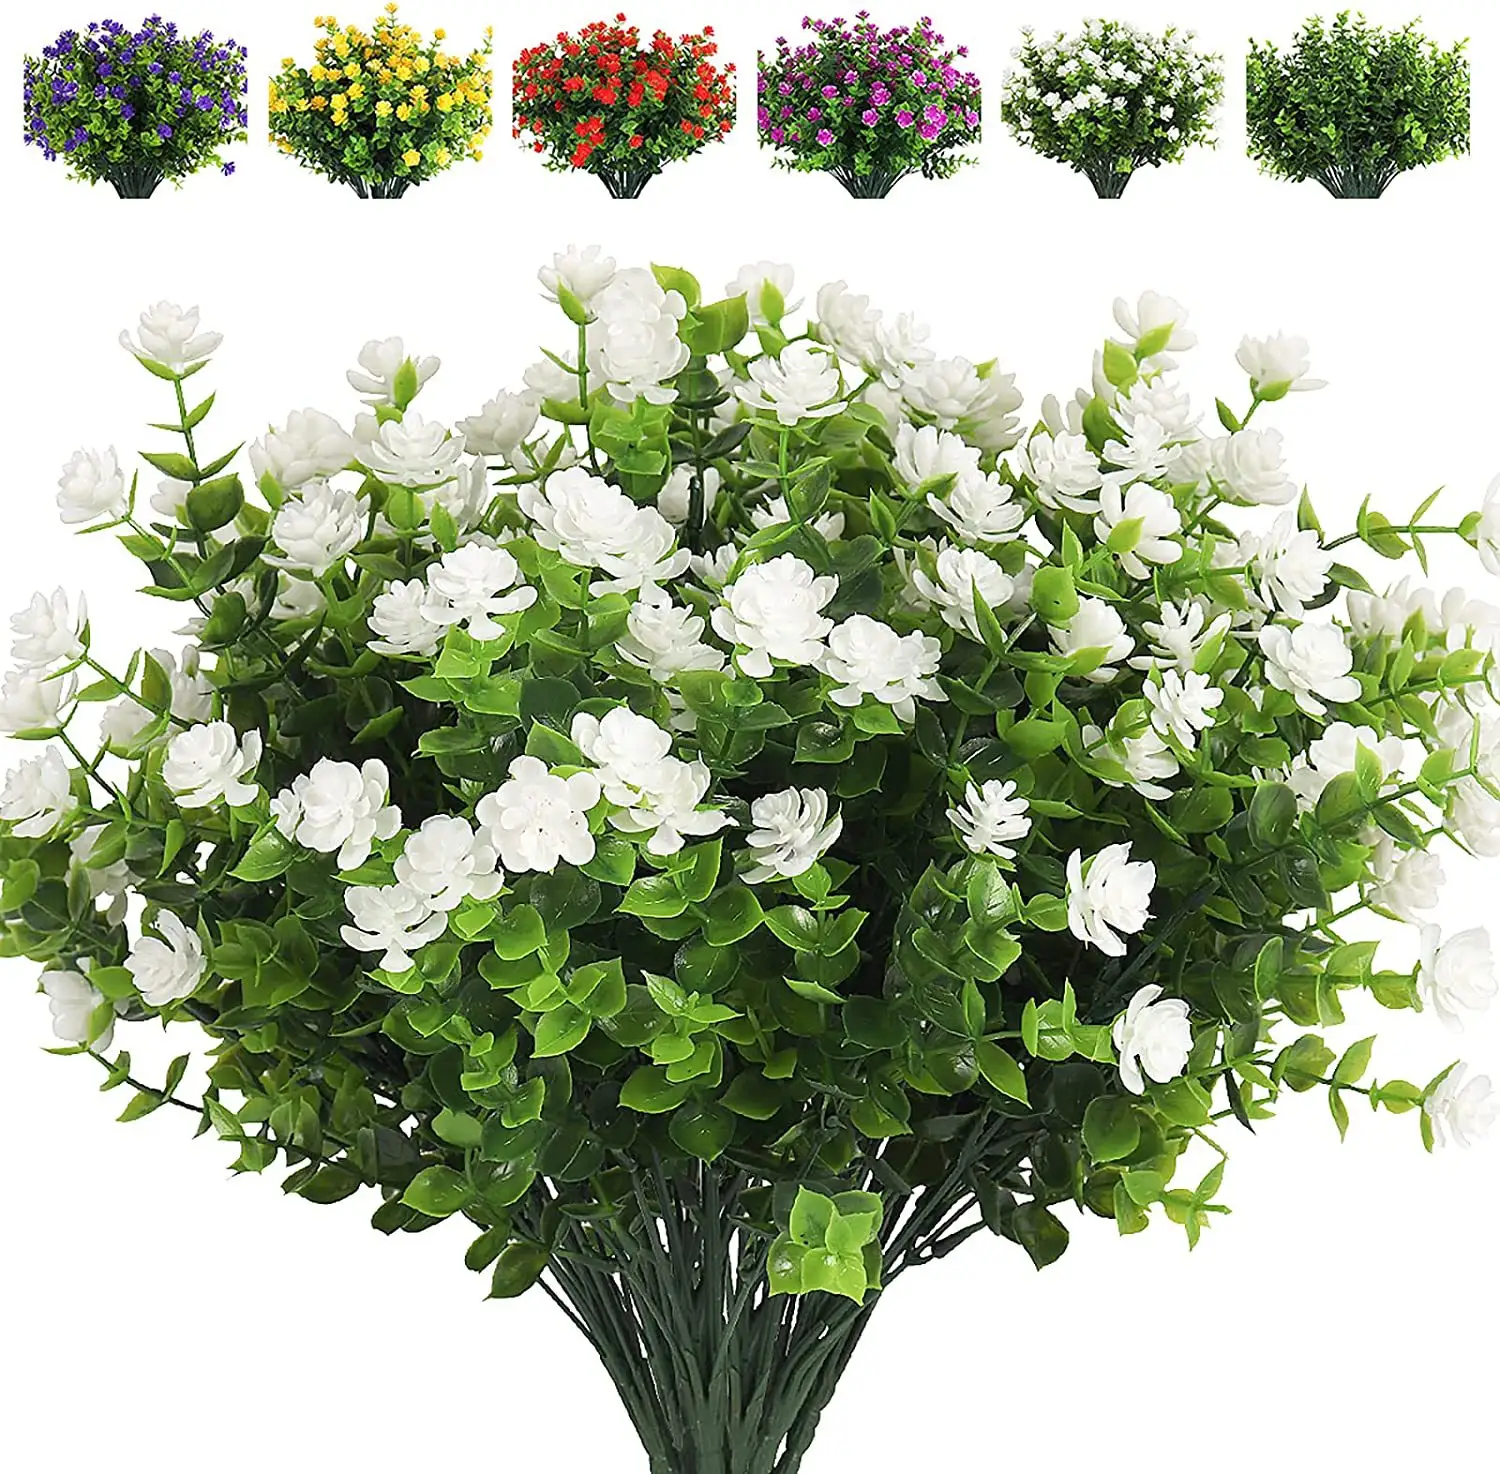 Artificial Eucalyptus Flowers UV Resistant Boxwood Shrubs Plastic Greenery Artificial Plants and Flowers for Outdoor Decor